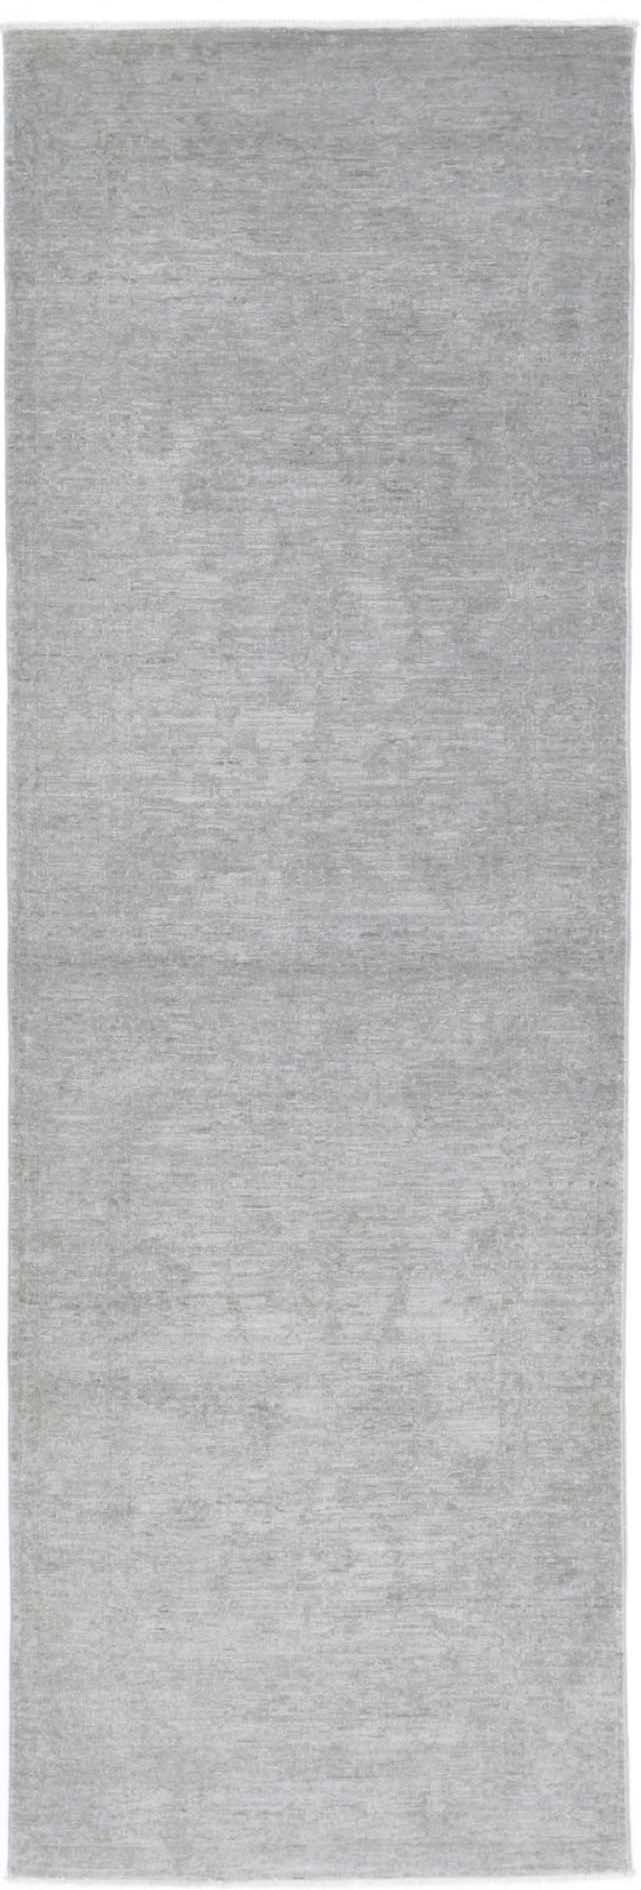 Hand Knotted Overdyed Wool Rug - 2'8'' x 8'6''